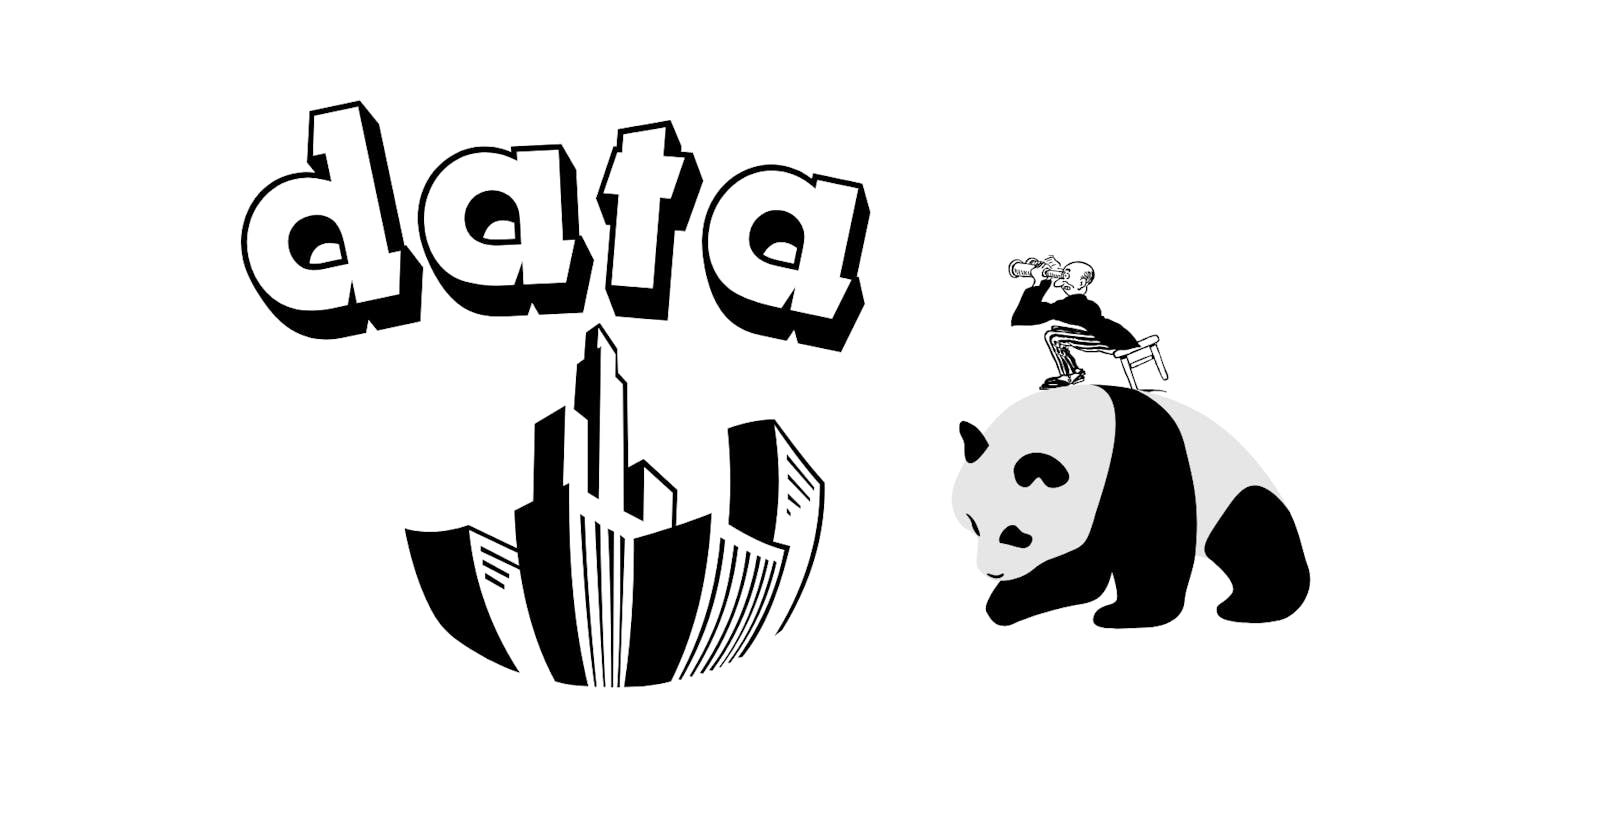 Data Analysis with Pandas: A Guide to Wrangling Data